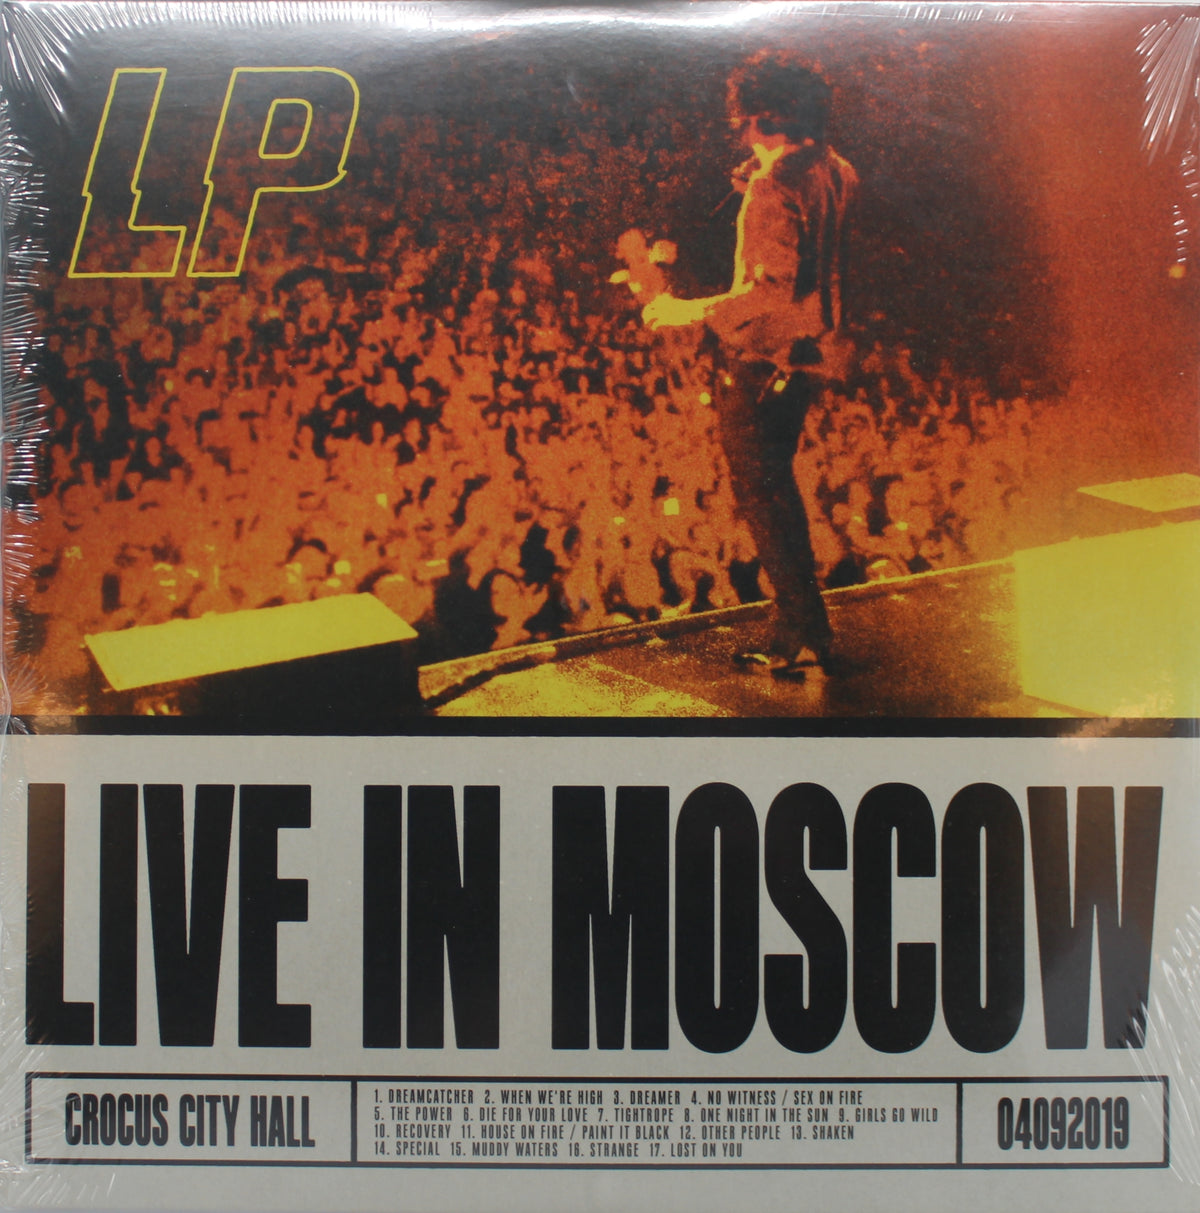 Laura Pergolizzi, L.P., Live in Moscow, 2020, Europe